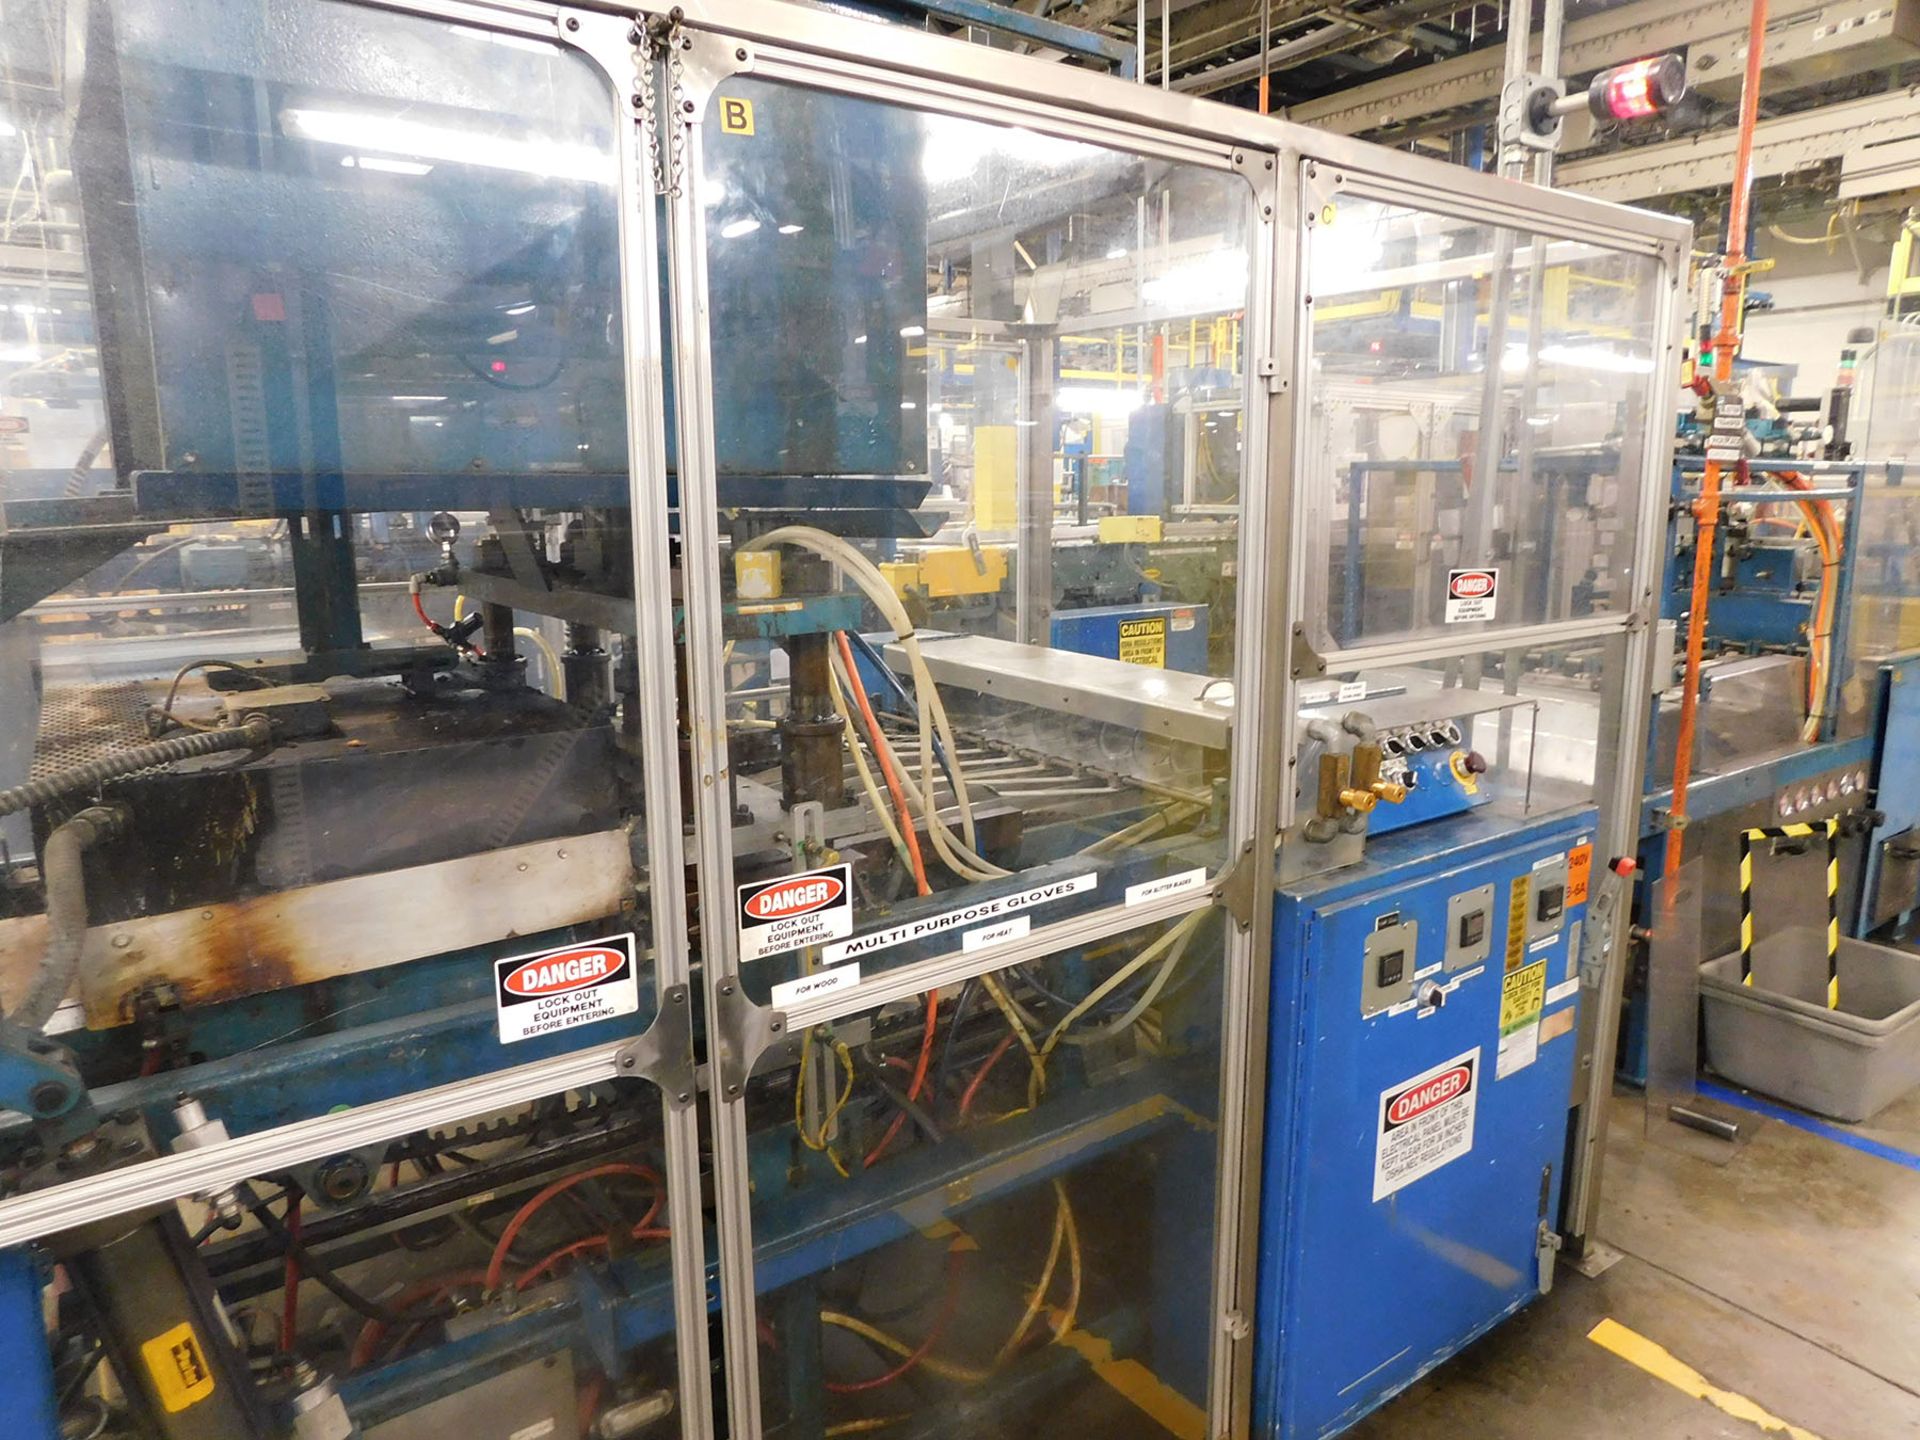 AA DURACELL BLISTER PACK LINE WITH FOLD OVER CASE PACKER, MOTORIZED ROLLER CONVEYOR AND ELEVATOR - Image 2 of 4